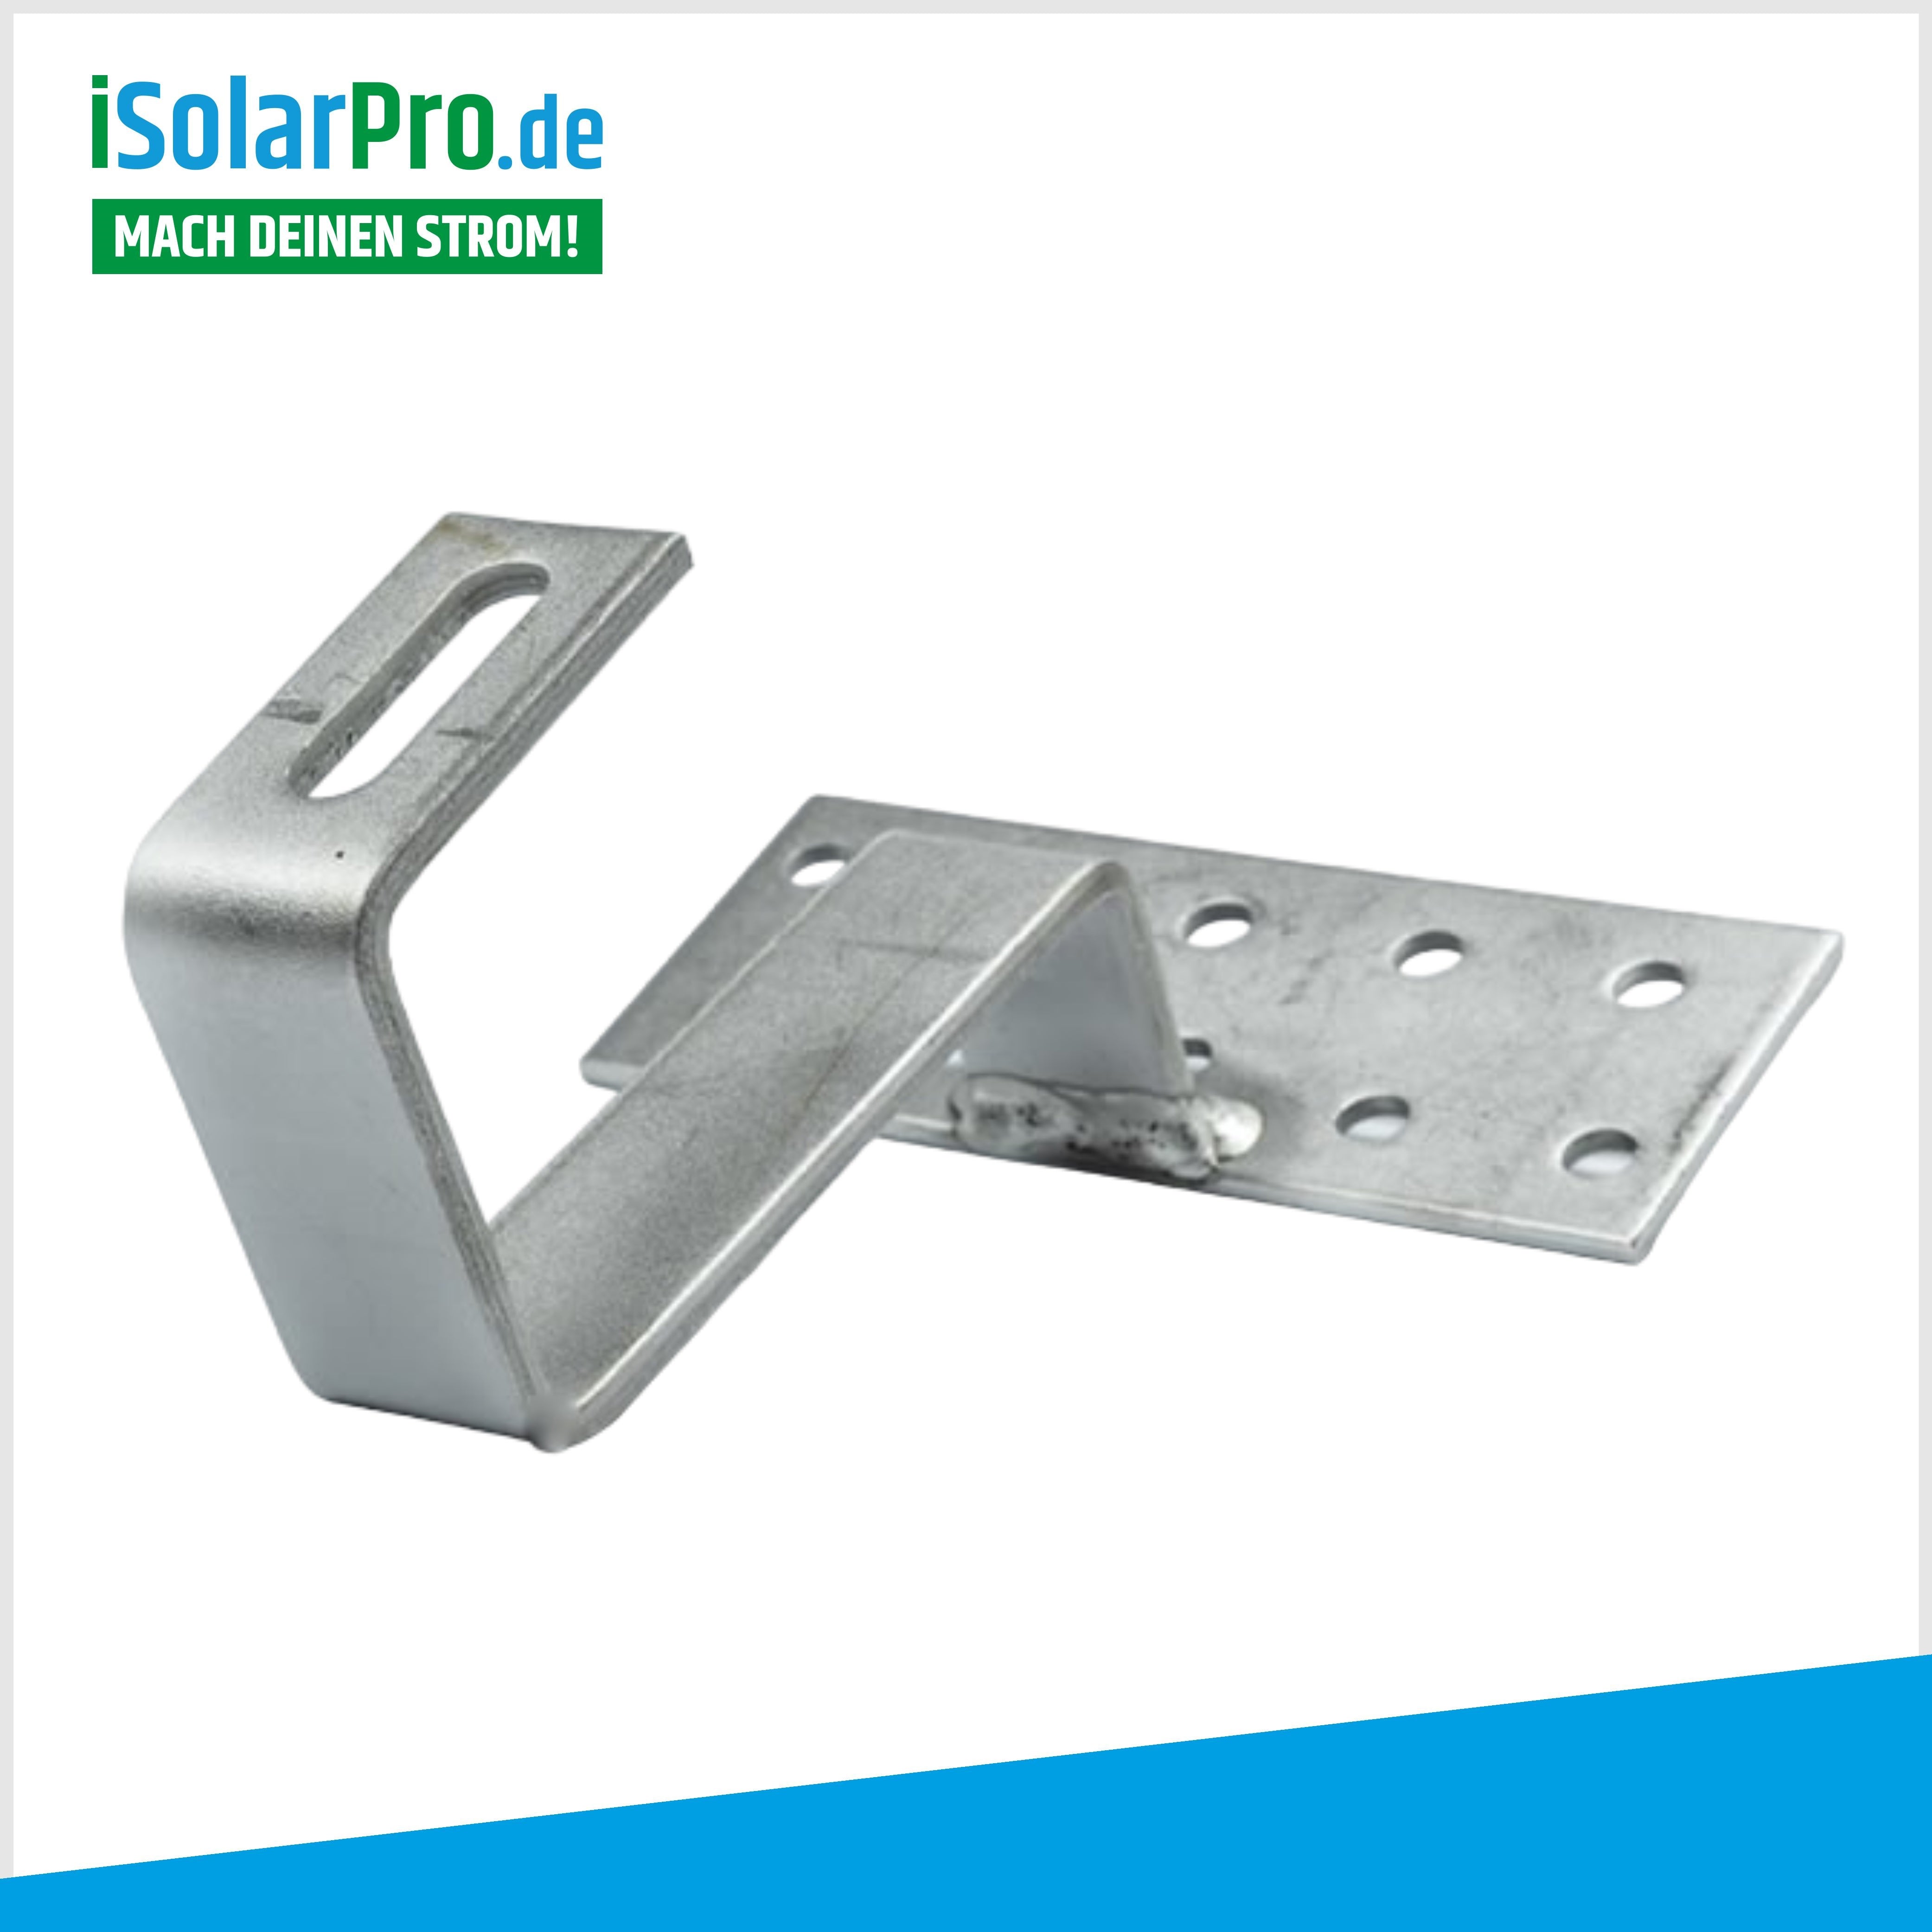 Roof mounting set for 4x solar panels 30mm upright, 1-row installation, tiled roof